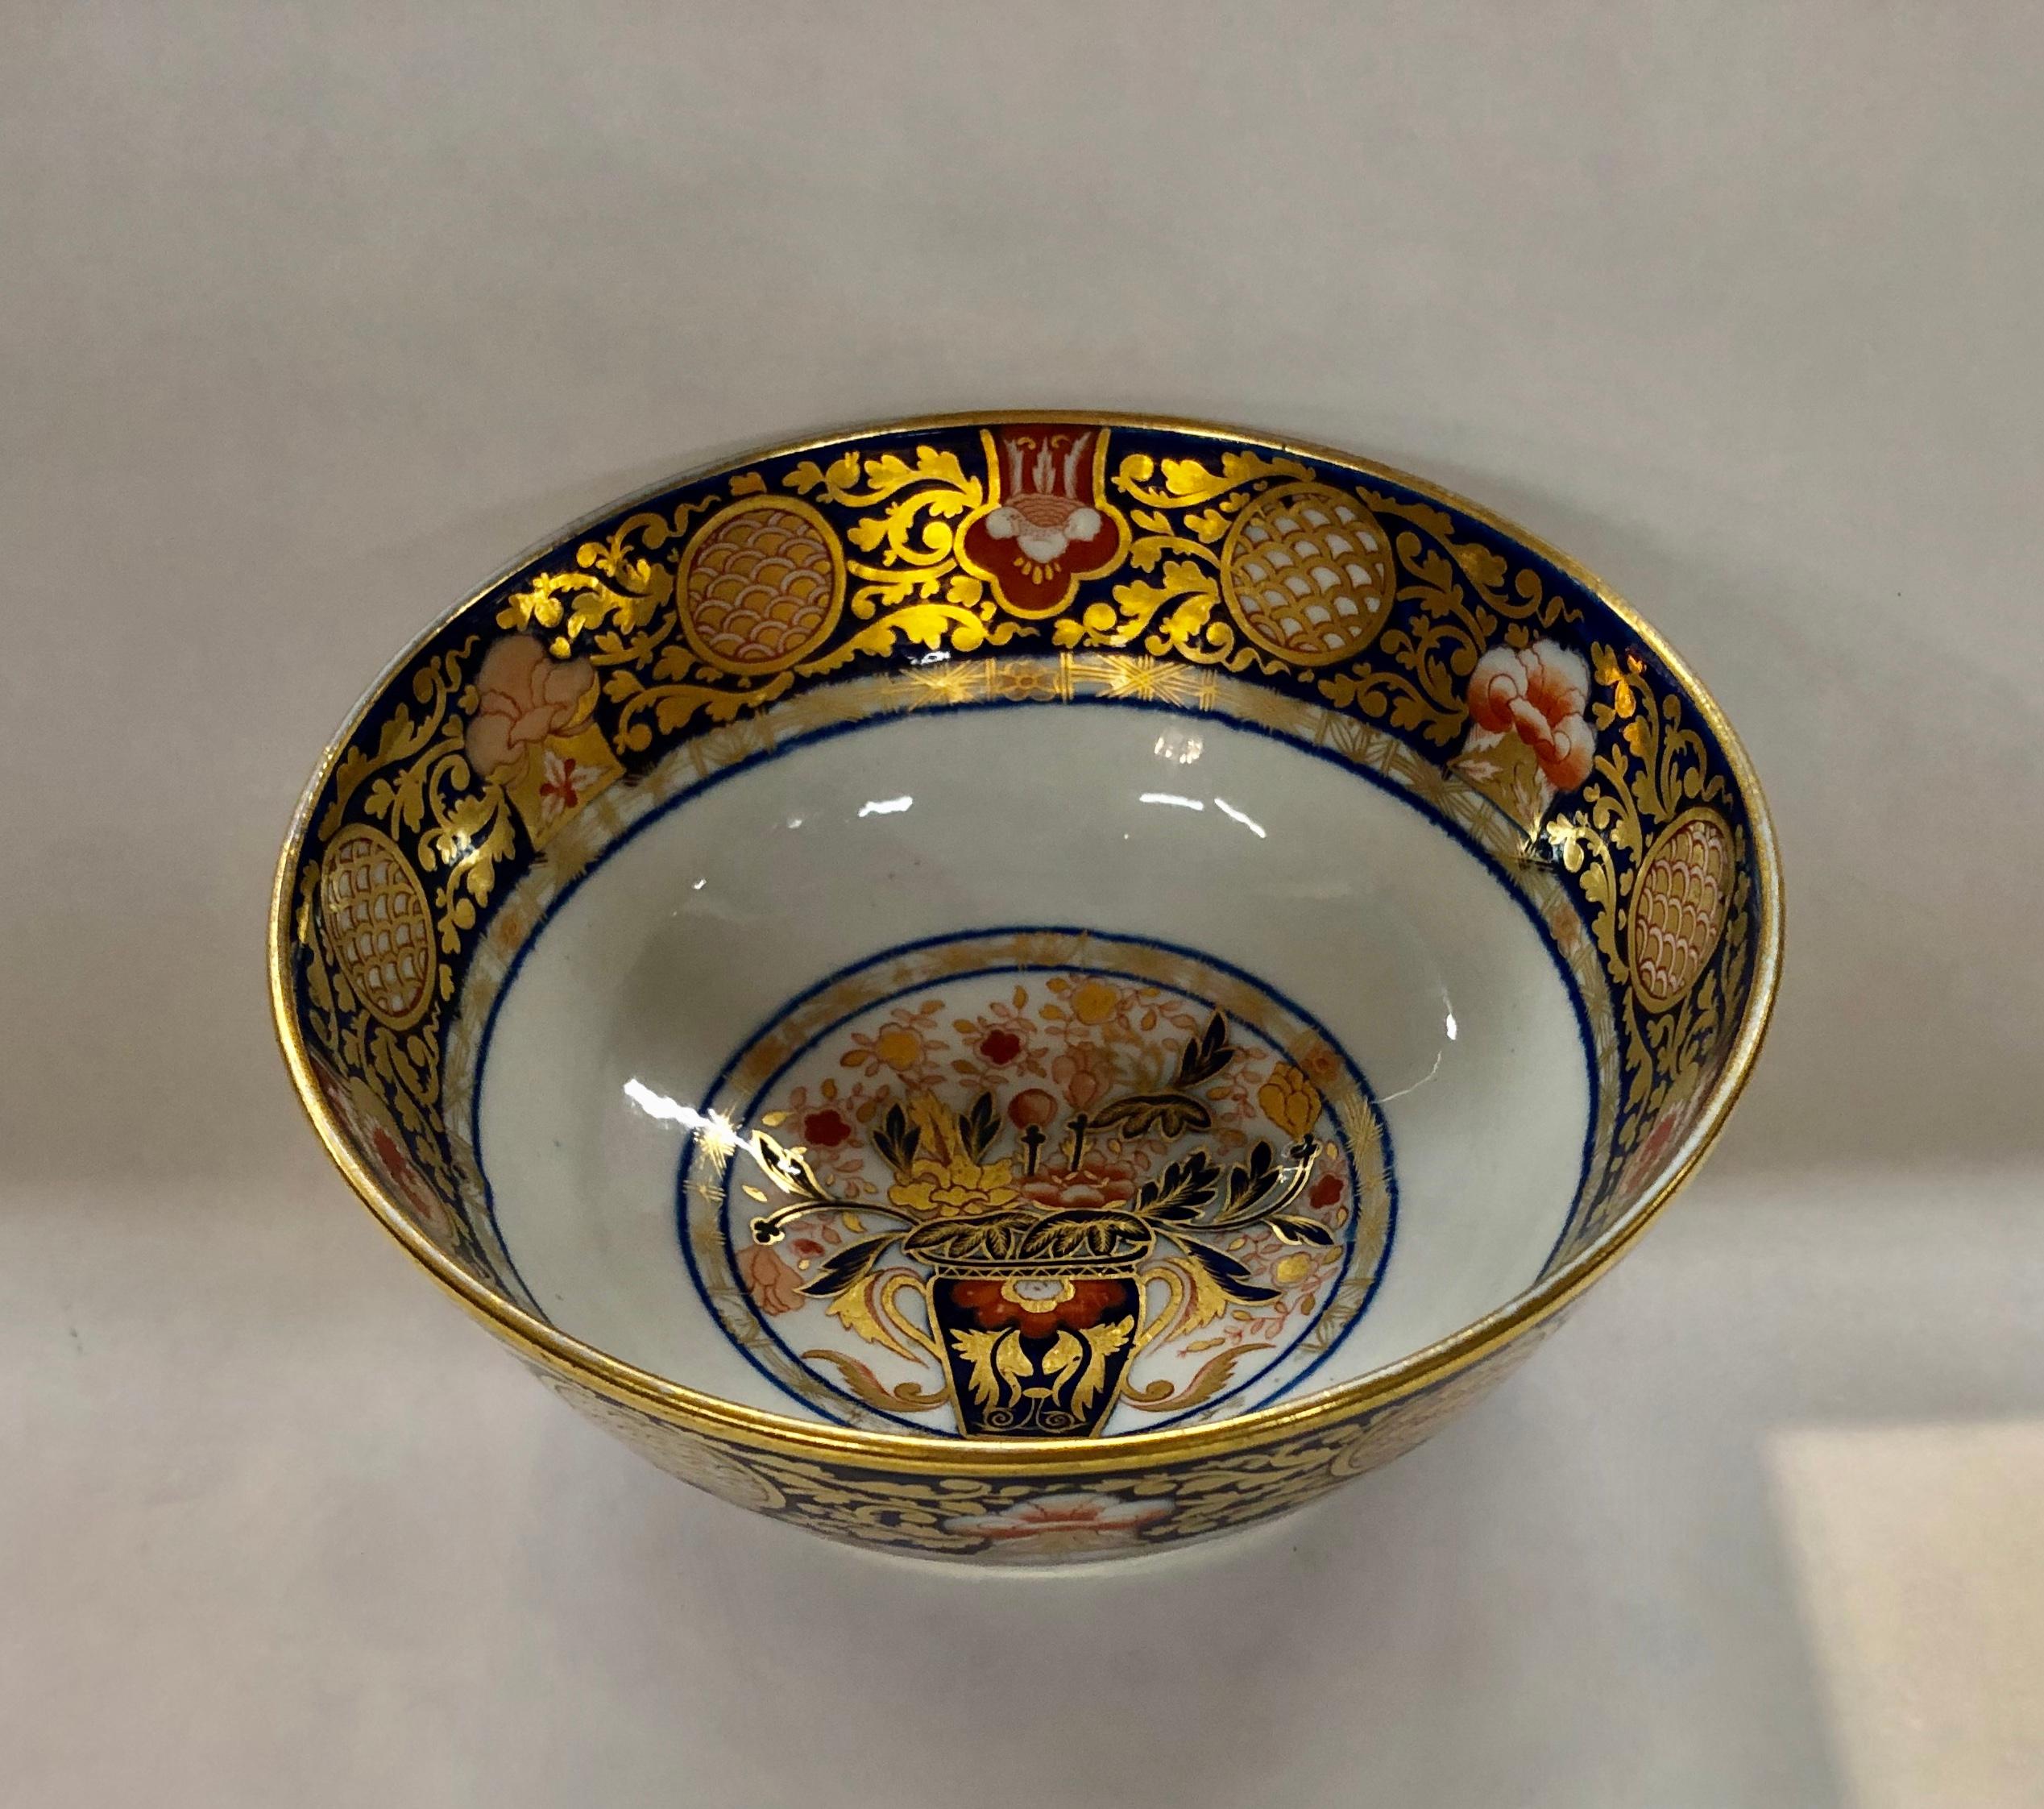 Rare and fine antique English George III hand painted imari decor bowl, attributed to spode.
Exceptional 